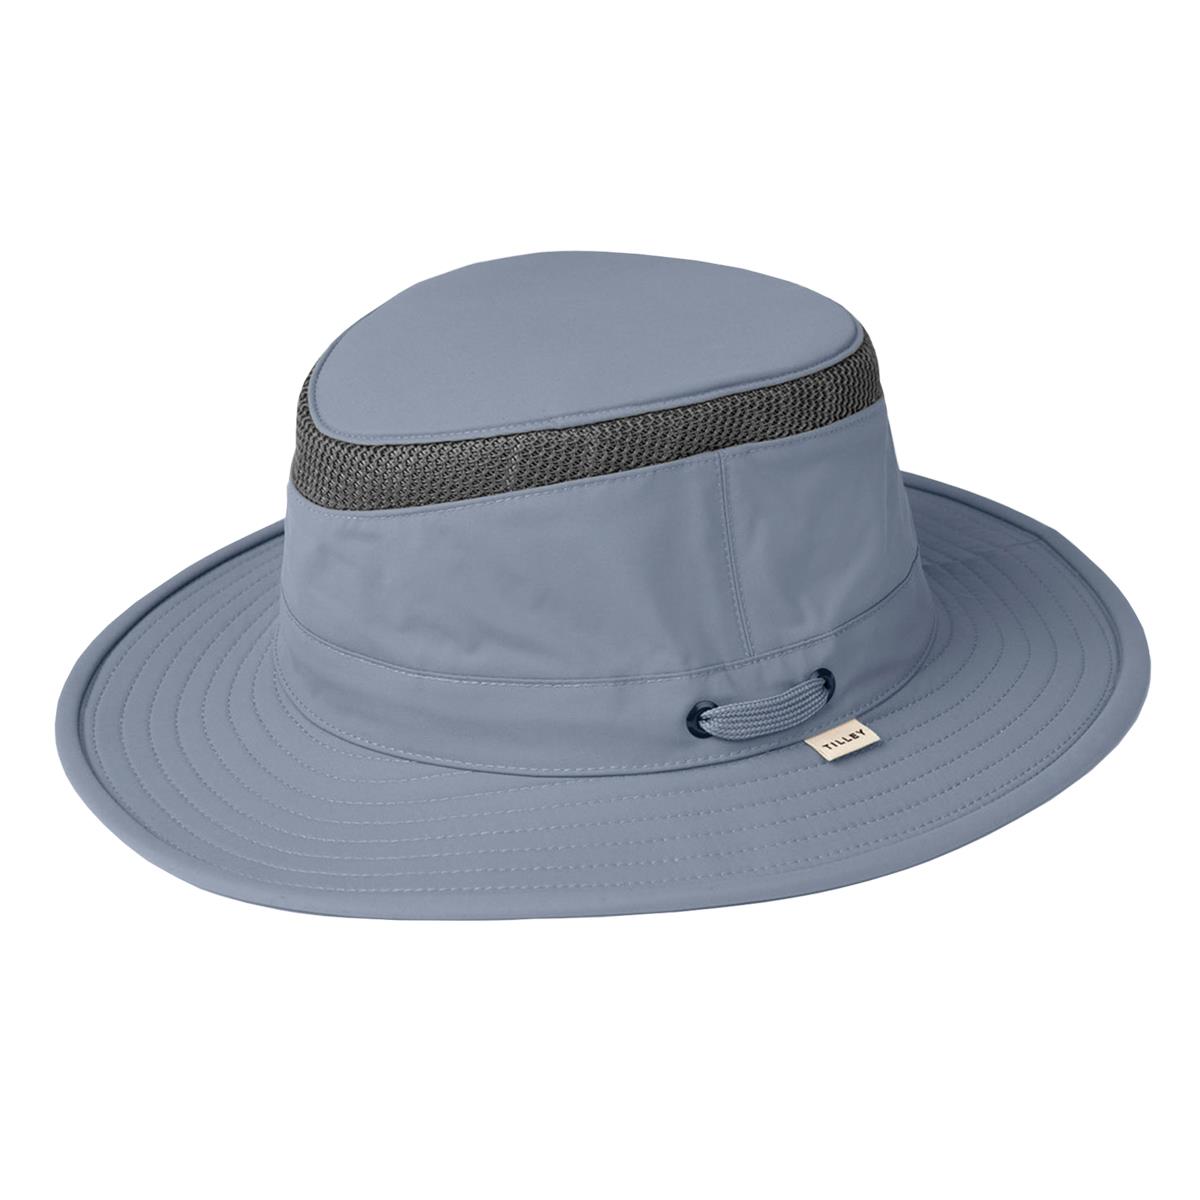 What is the warranty for the Tilley LTM5 hat?